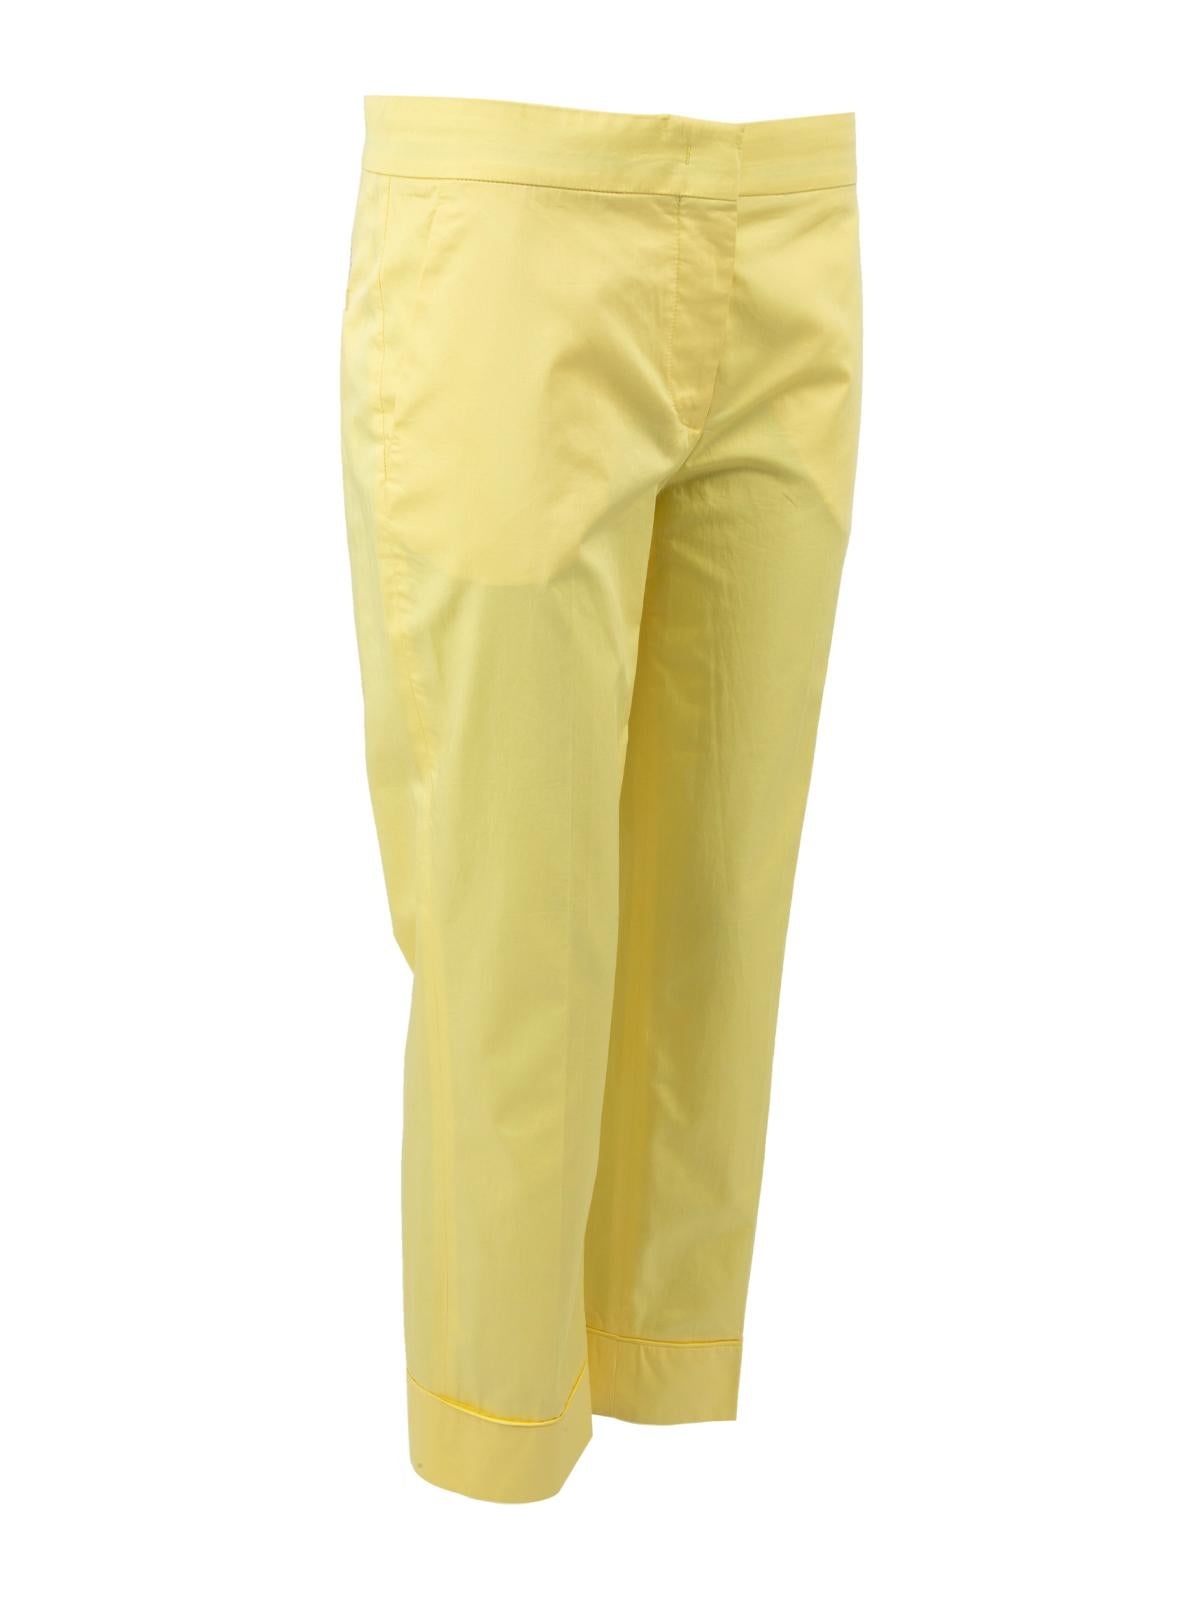 CONDITION is Never worn, with tags. No visible wear to trousers is evident on this new Emilio Pucci designer resale item.  Details  Canary yellow Cotton Slim fit High waisted Cropped leg Zip, clasp and button front fastening 2x Hip pockets 2x Faux